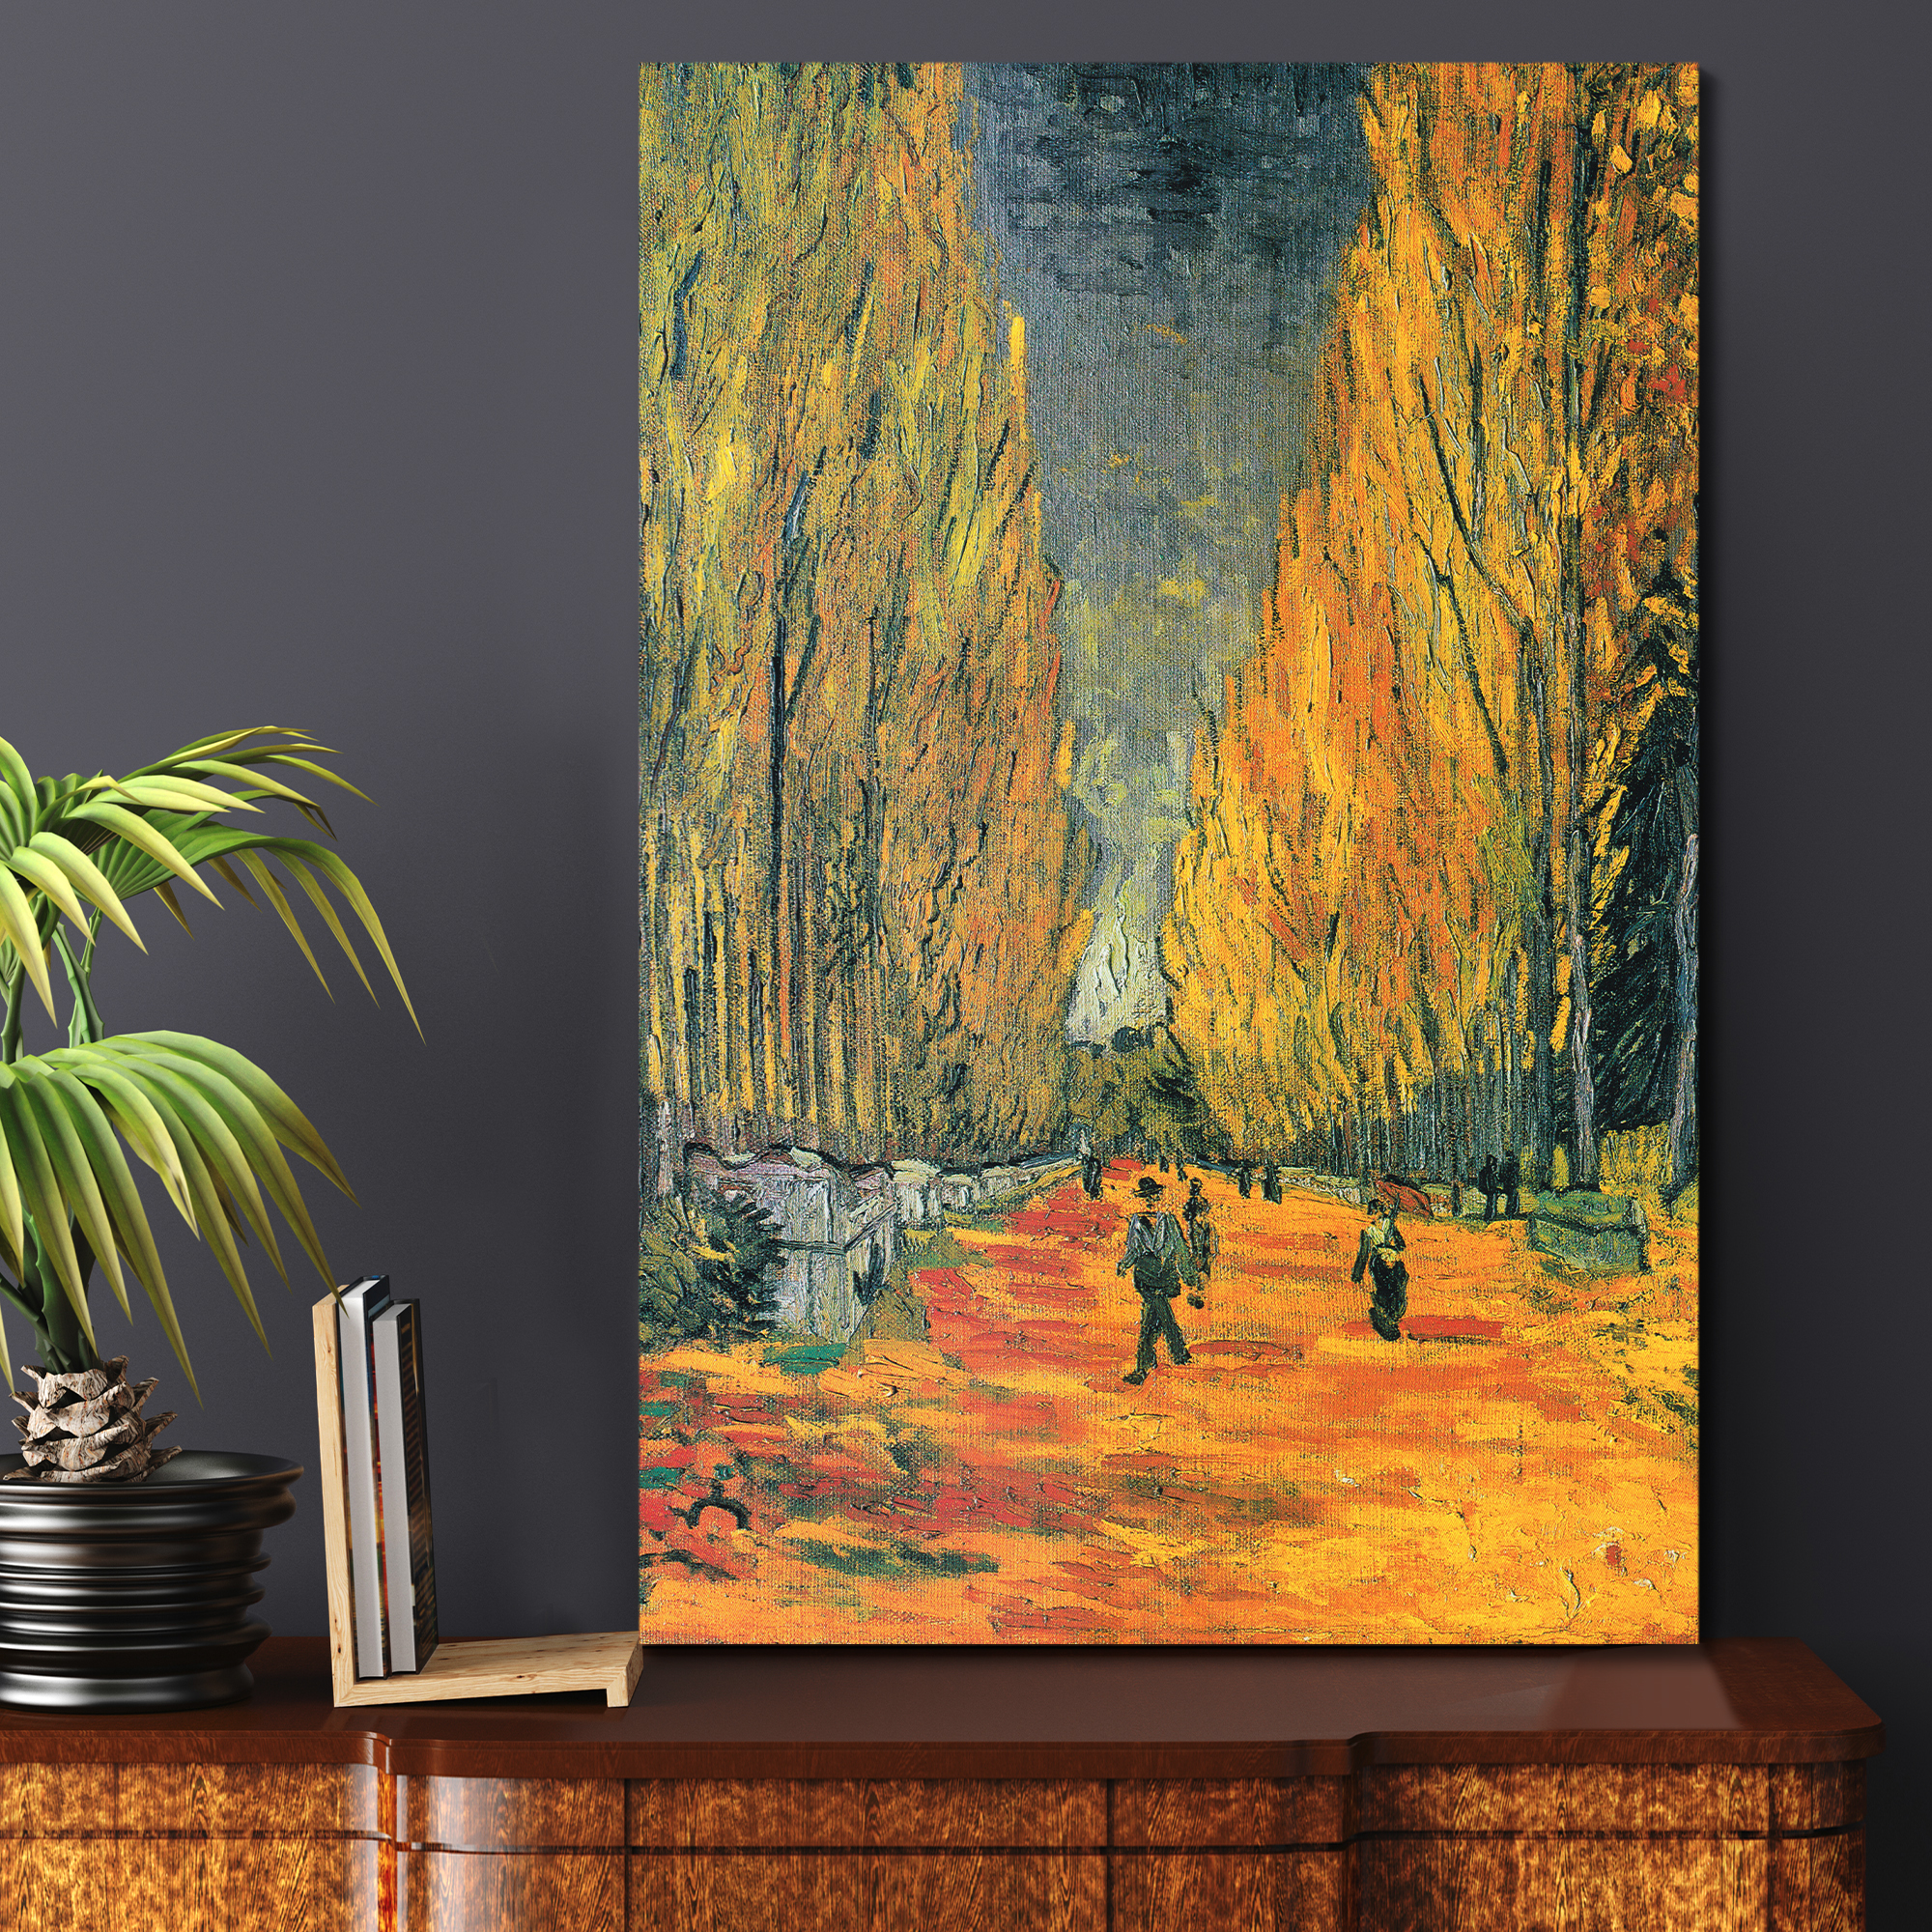 Les Alyscamps by Vincent Van Gogh - Oil Painting Reproduction on Canvas Prints Wall Art, Ready to Hang - 16x24 inches